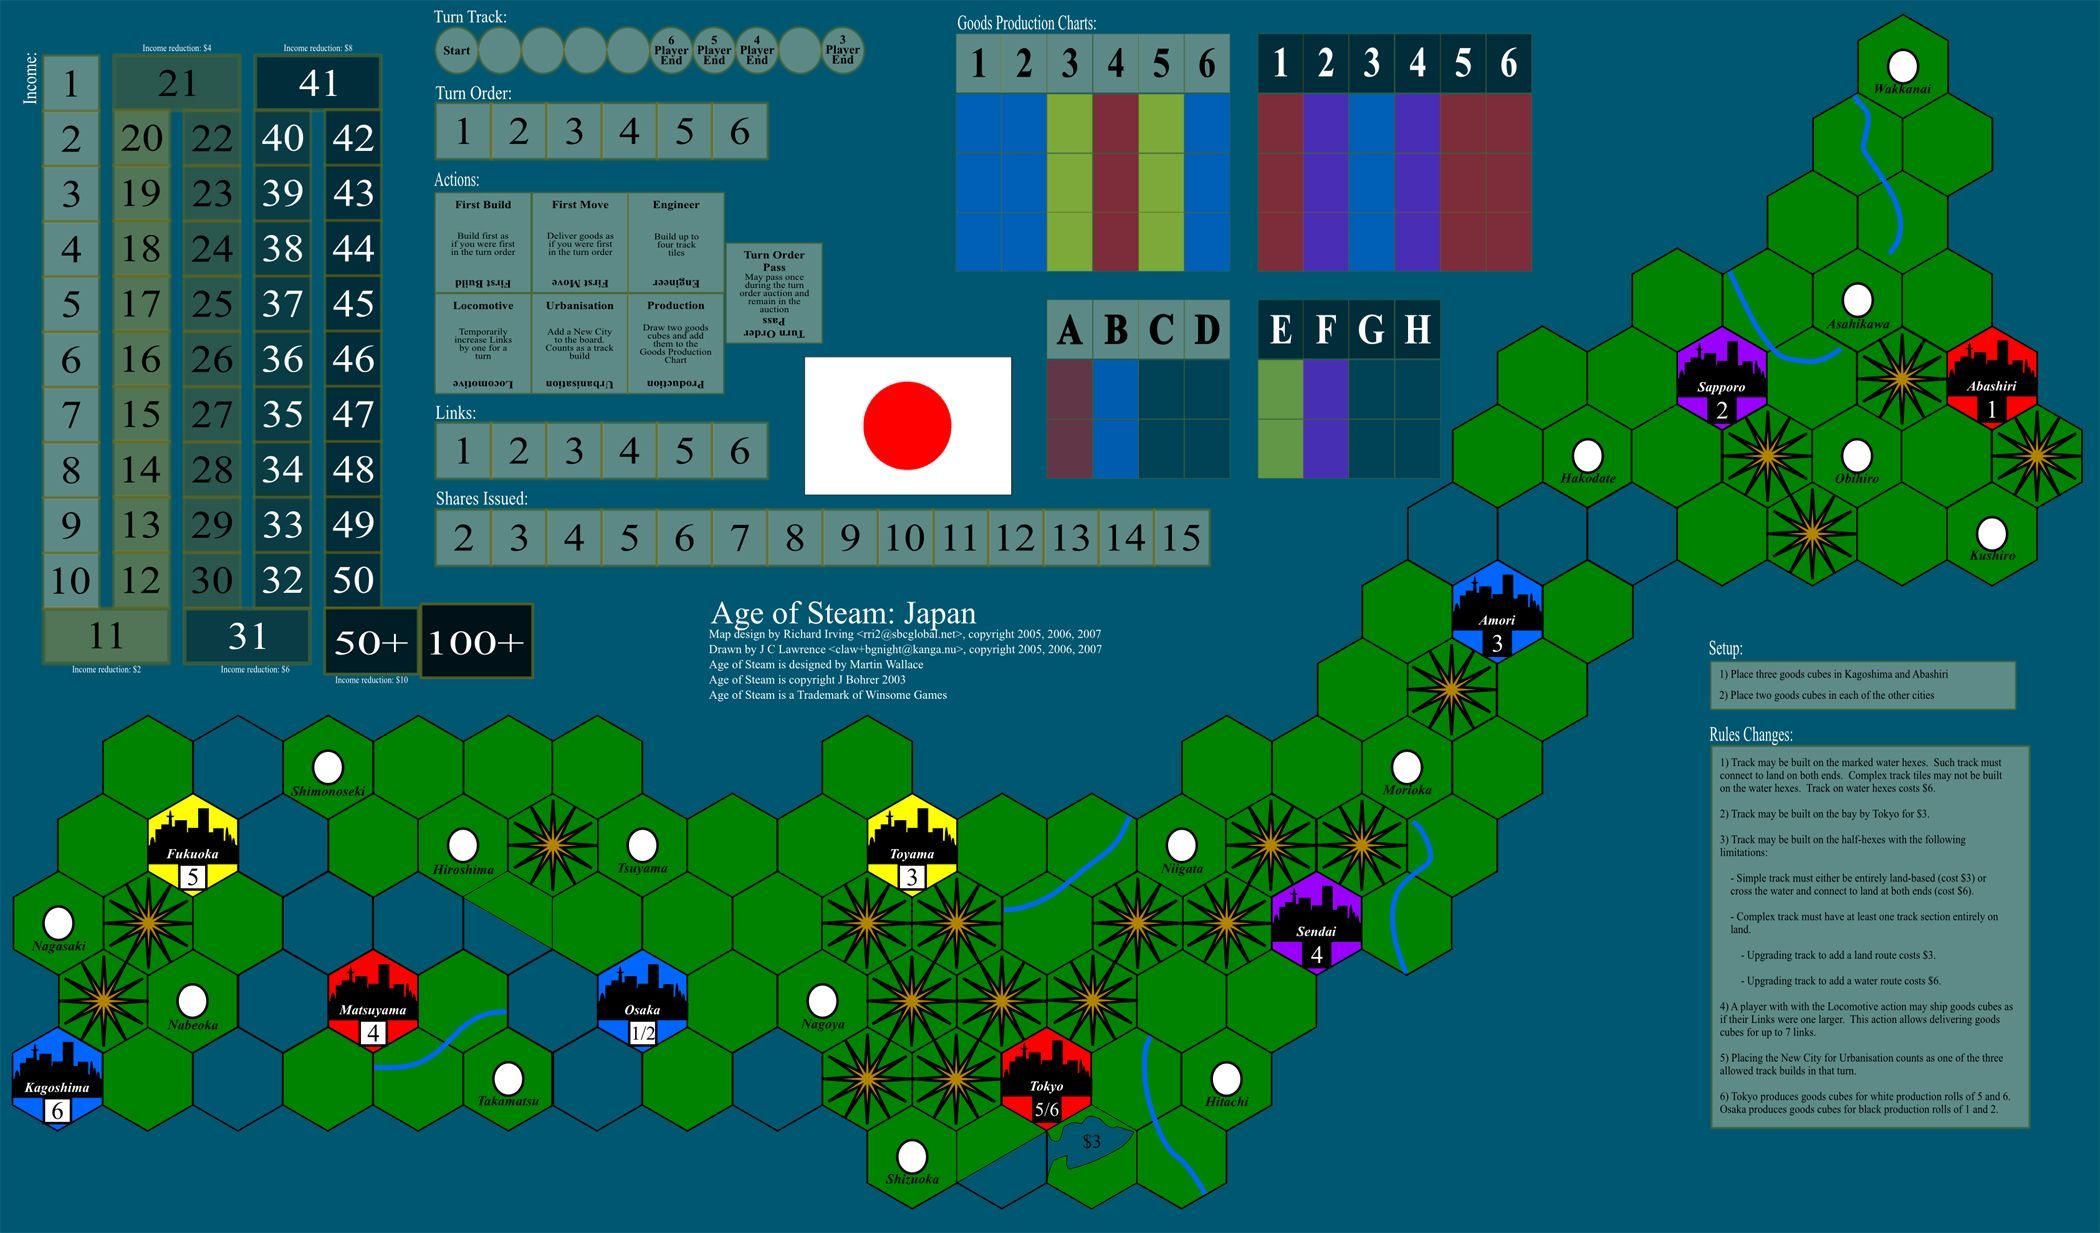 Age of Steam Expansion: Japan